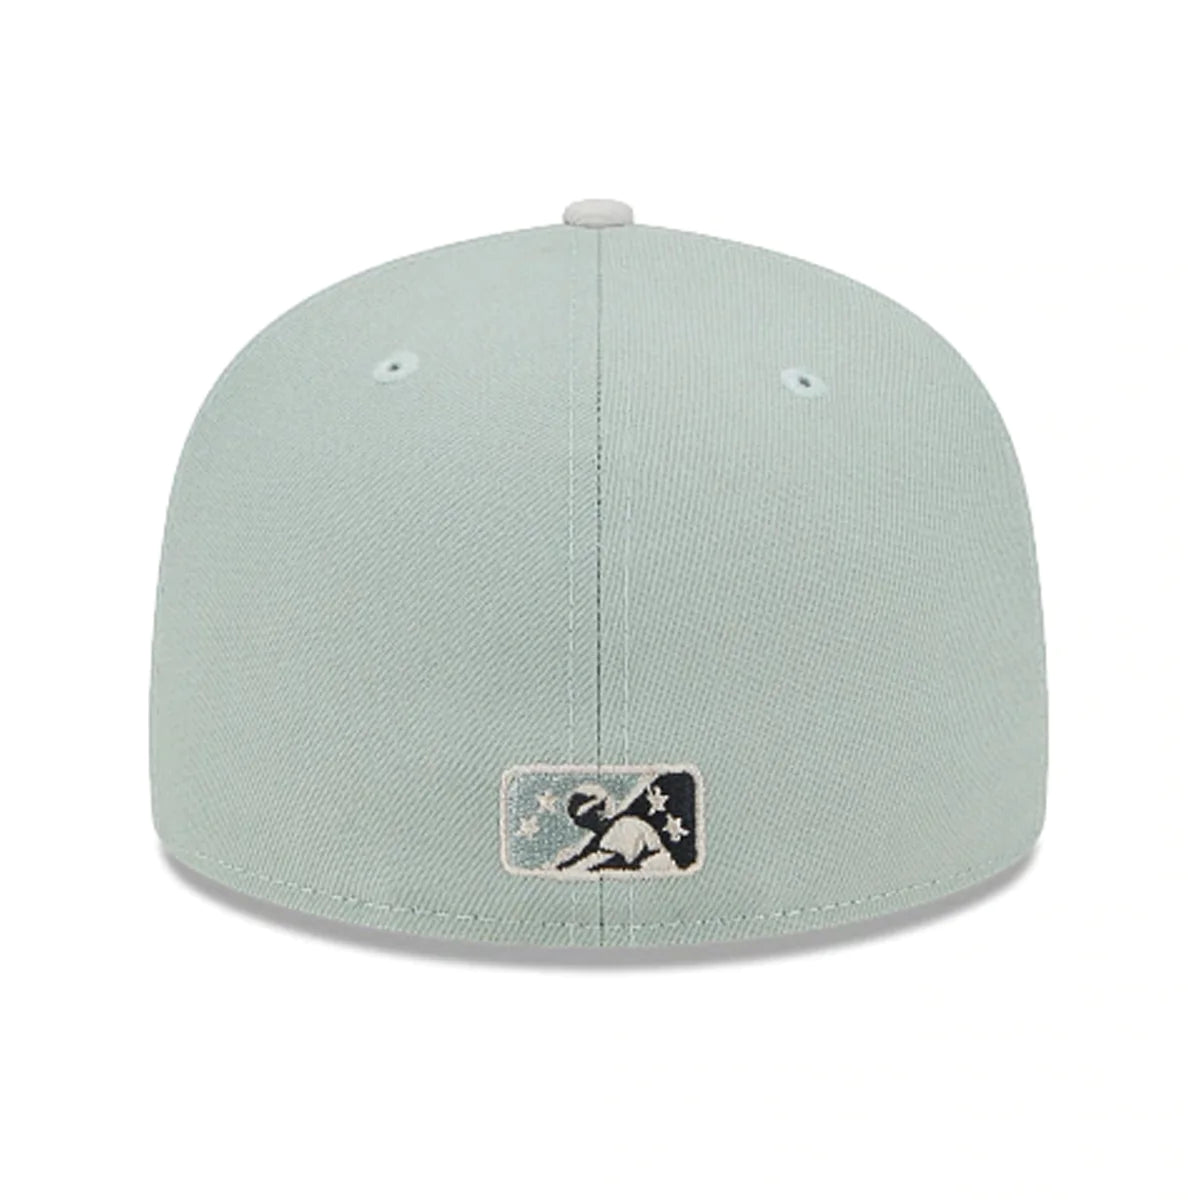 NEW ERA 5950 HOMETOWN ROOTS FITTED